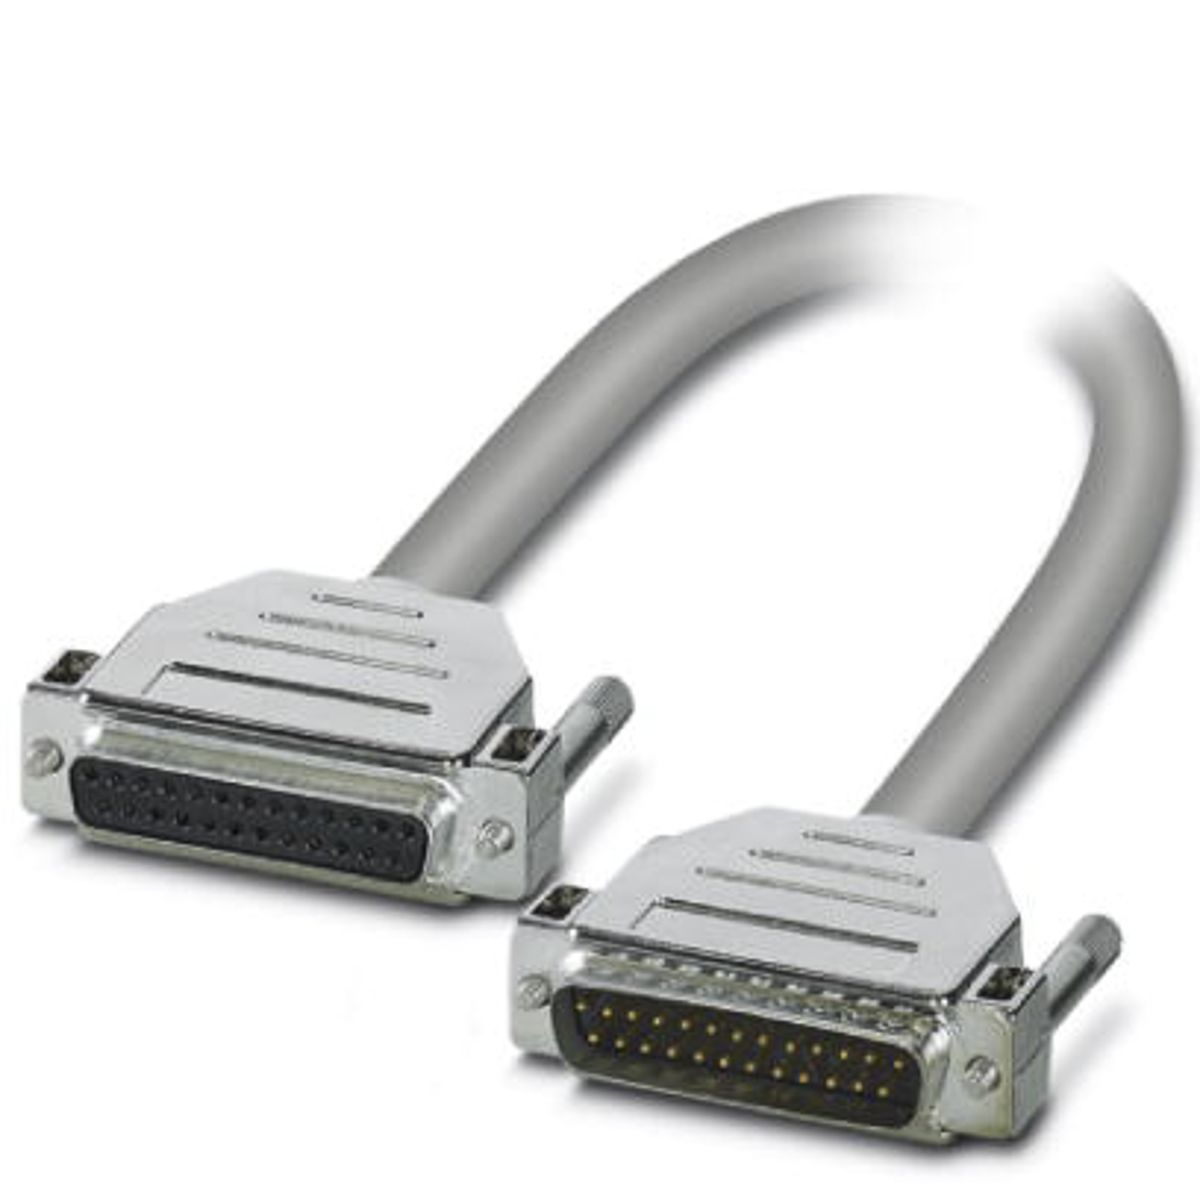 Phoenix Contact 1.5m 25 pin D-sub to 25 pin D-sub Serial Cable